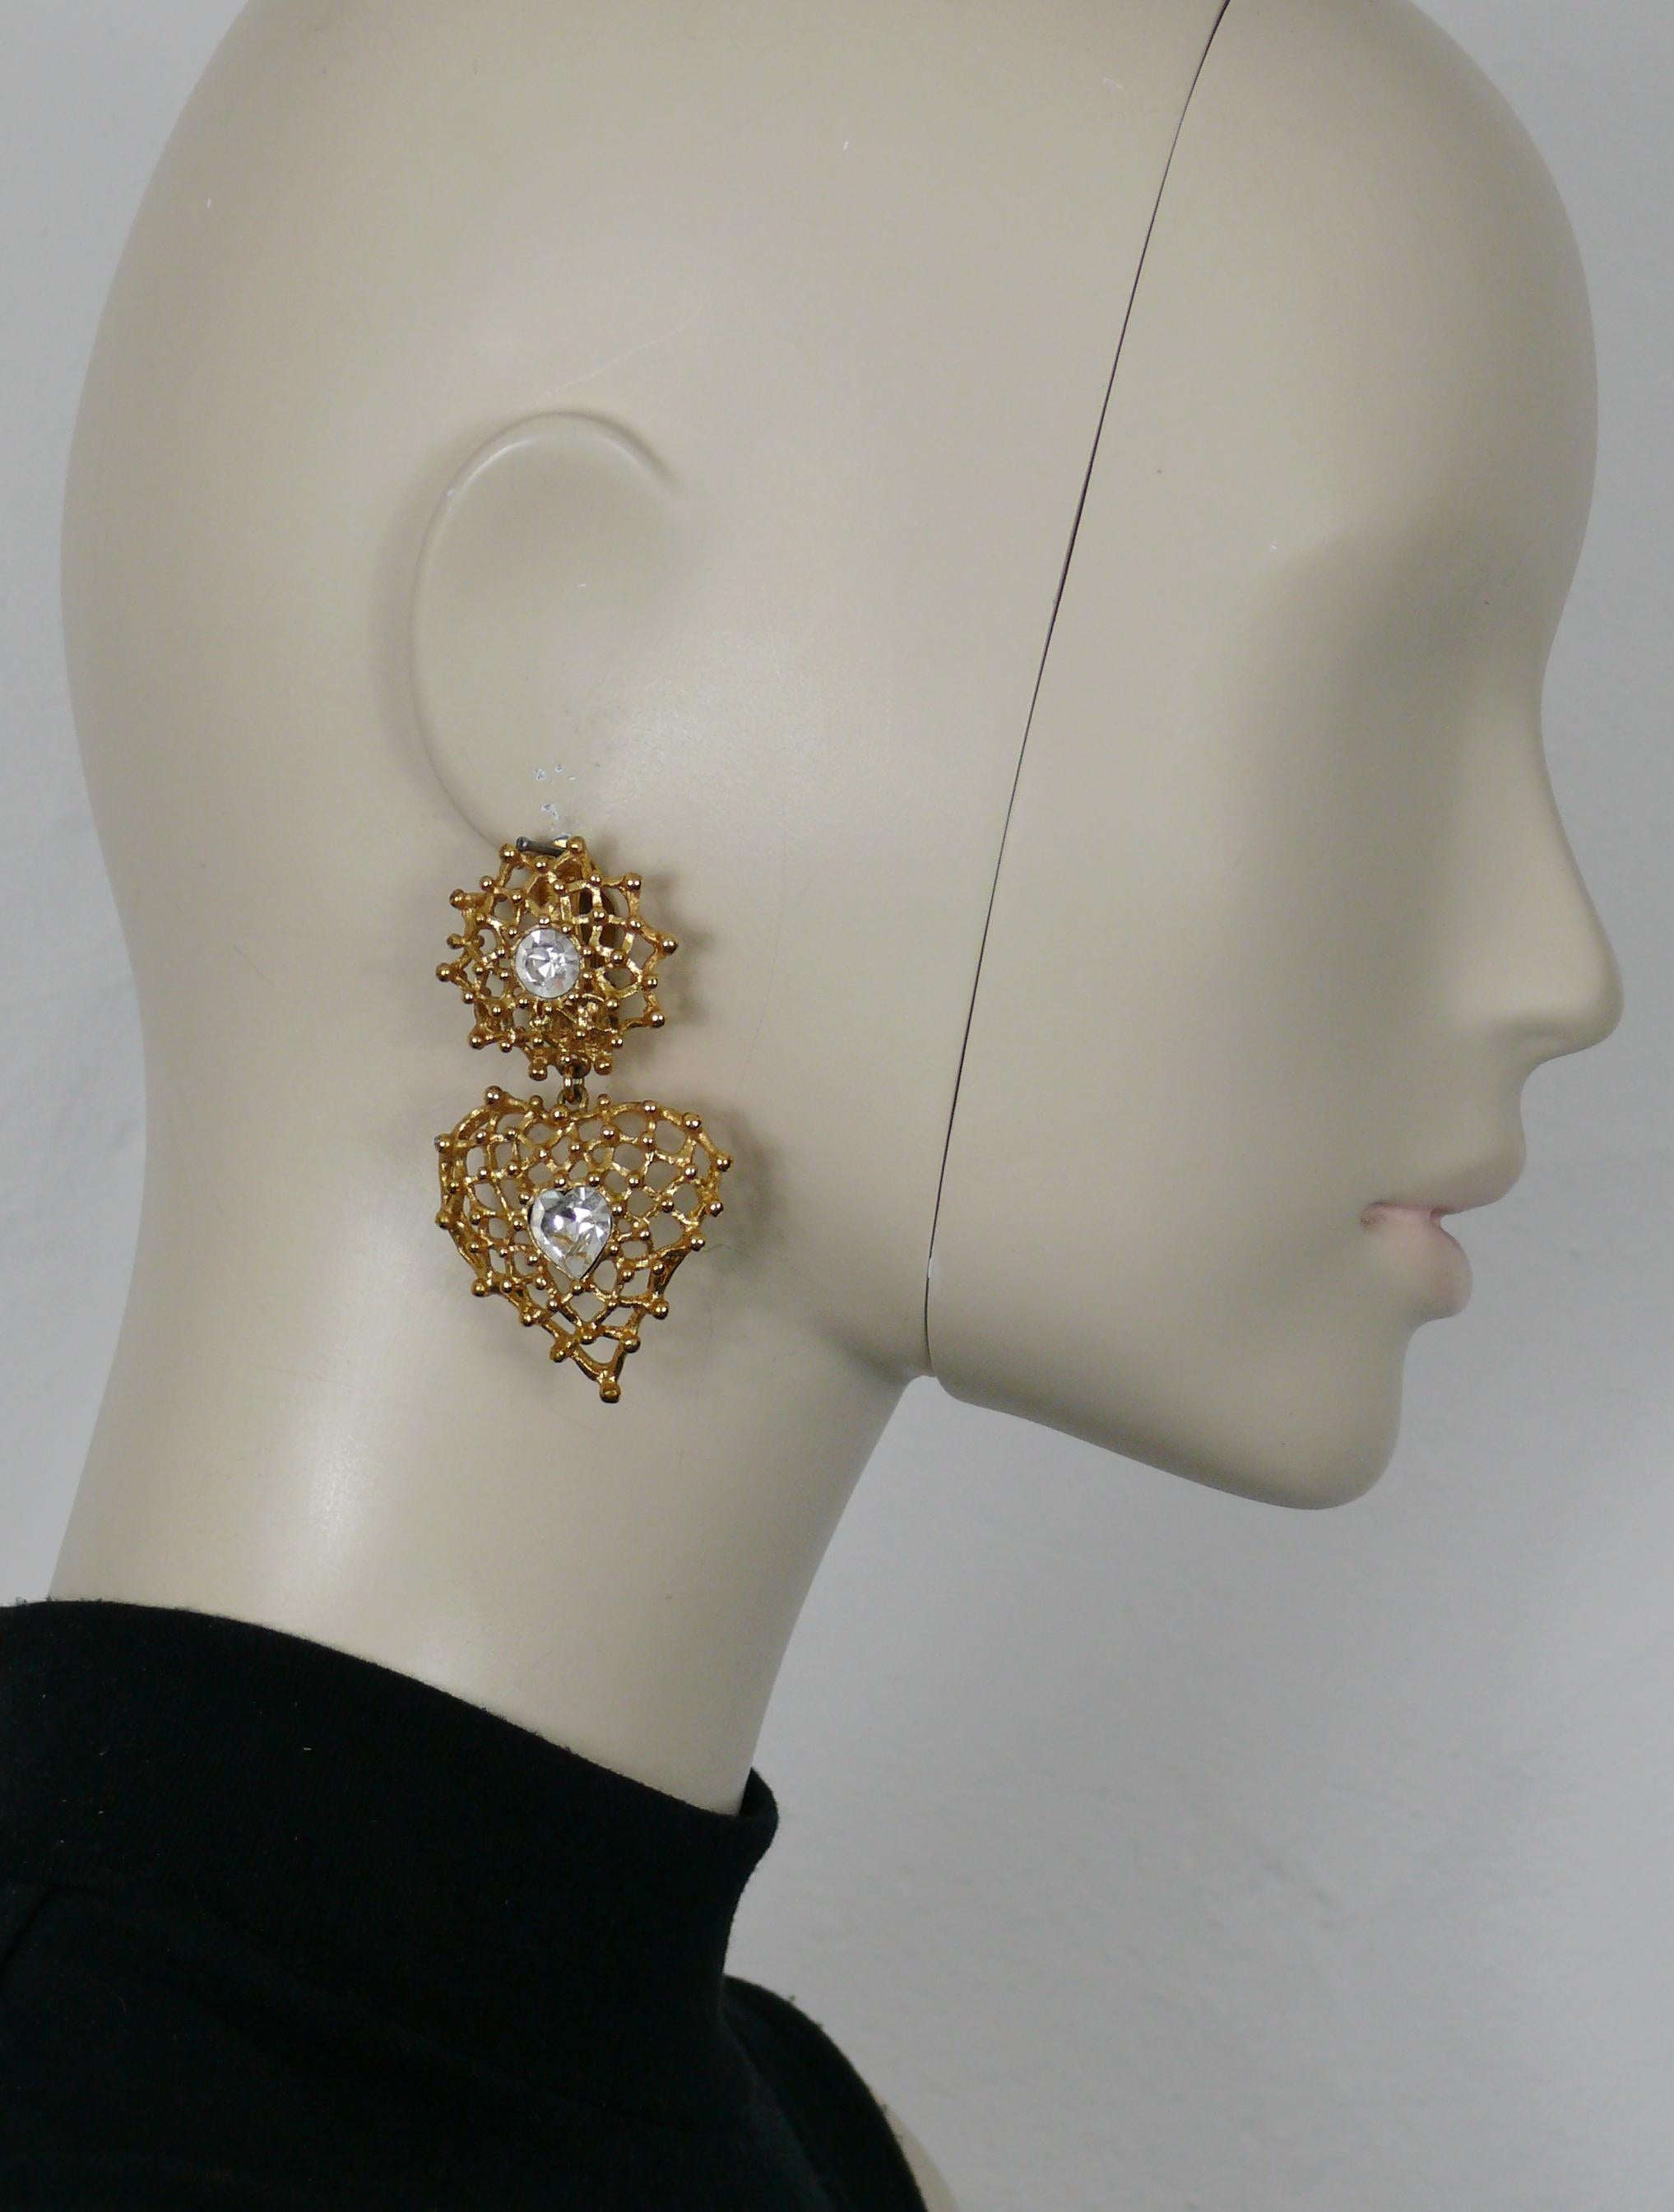 YVES SAINT LAURENT vintage gold tone wire mesh heart shaped dangling earrings (clip on) embellished with clear crystals.

Embossed YSL Made in France.

Indicative measurements : height approx. 6.5 cm (2.56 inches) / max. width approx. 3.5 cm (1.38